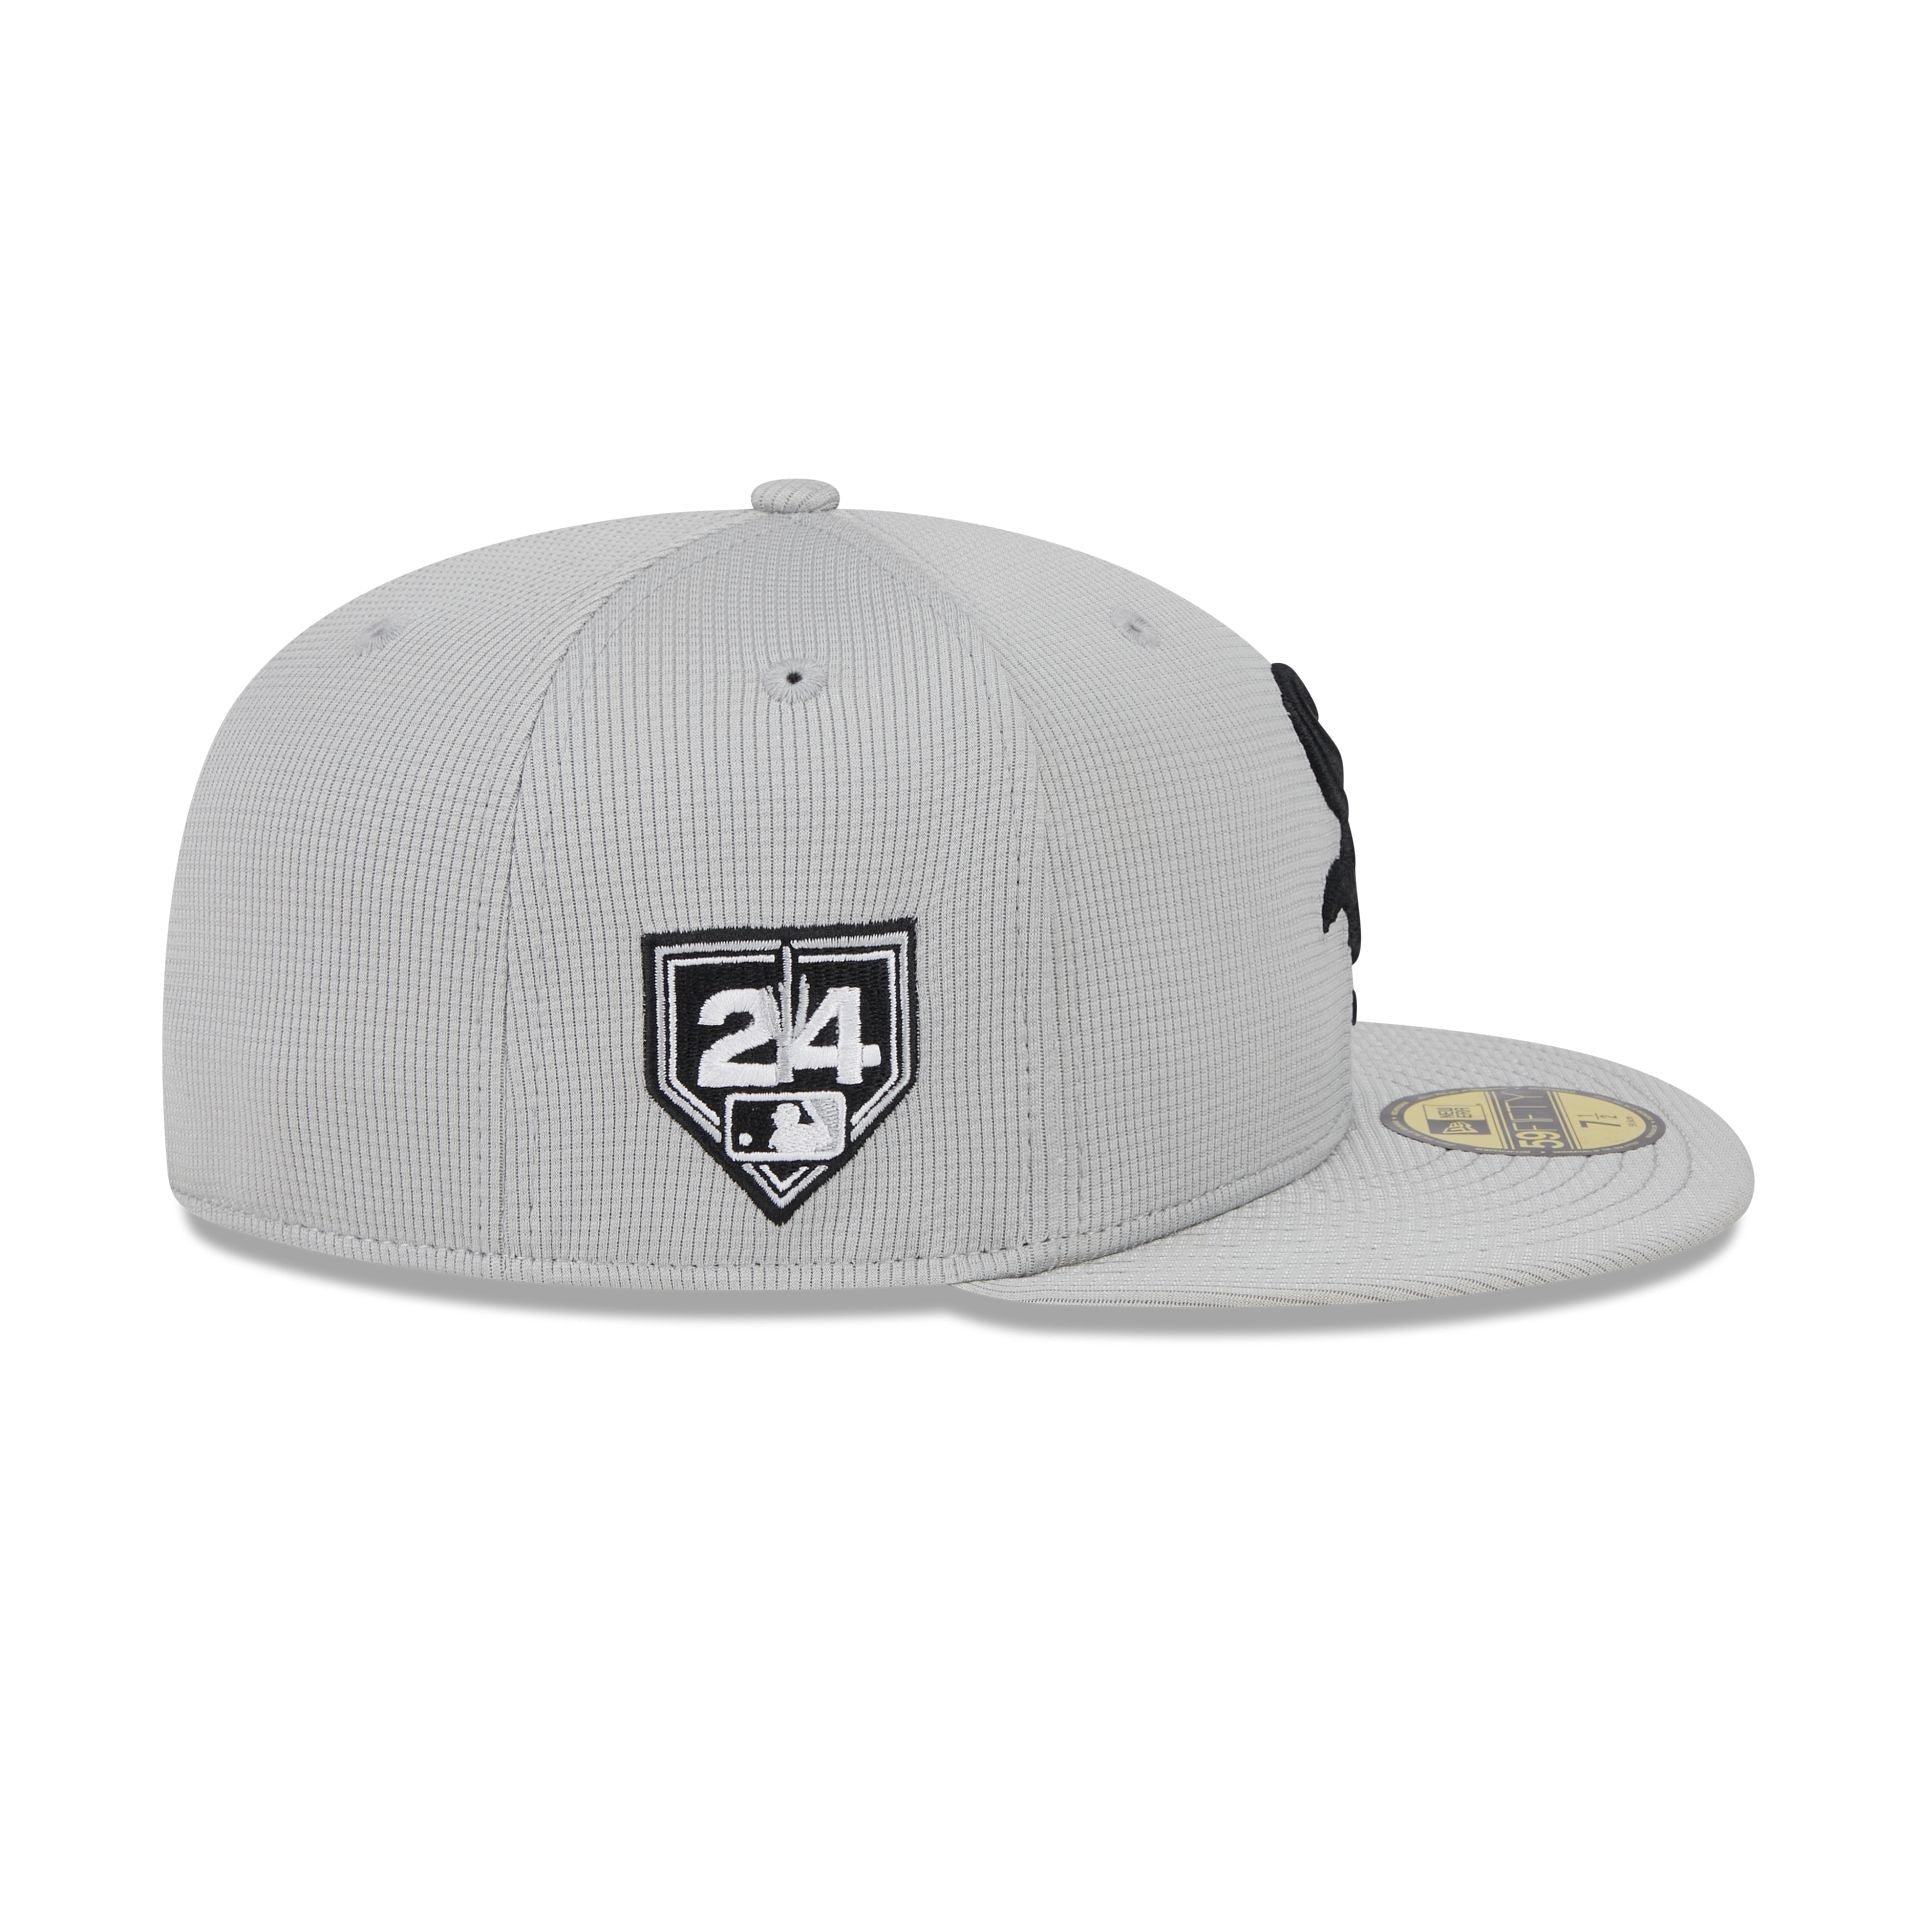 Shop the Ice White Golf Cap - Willow Athleticwear